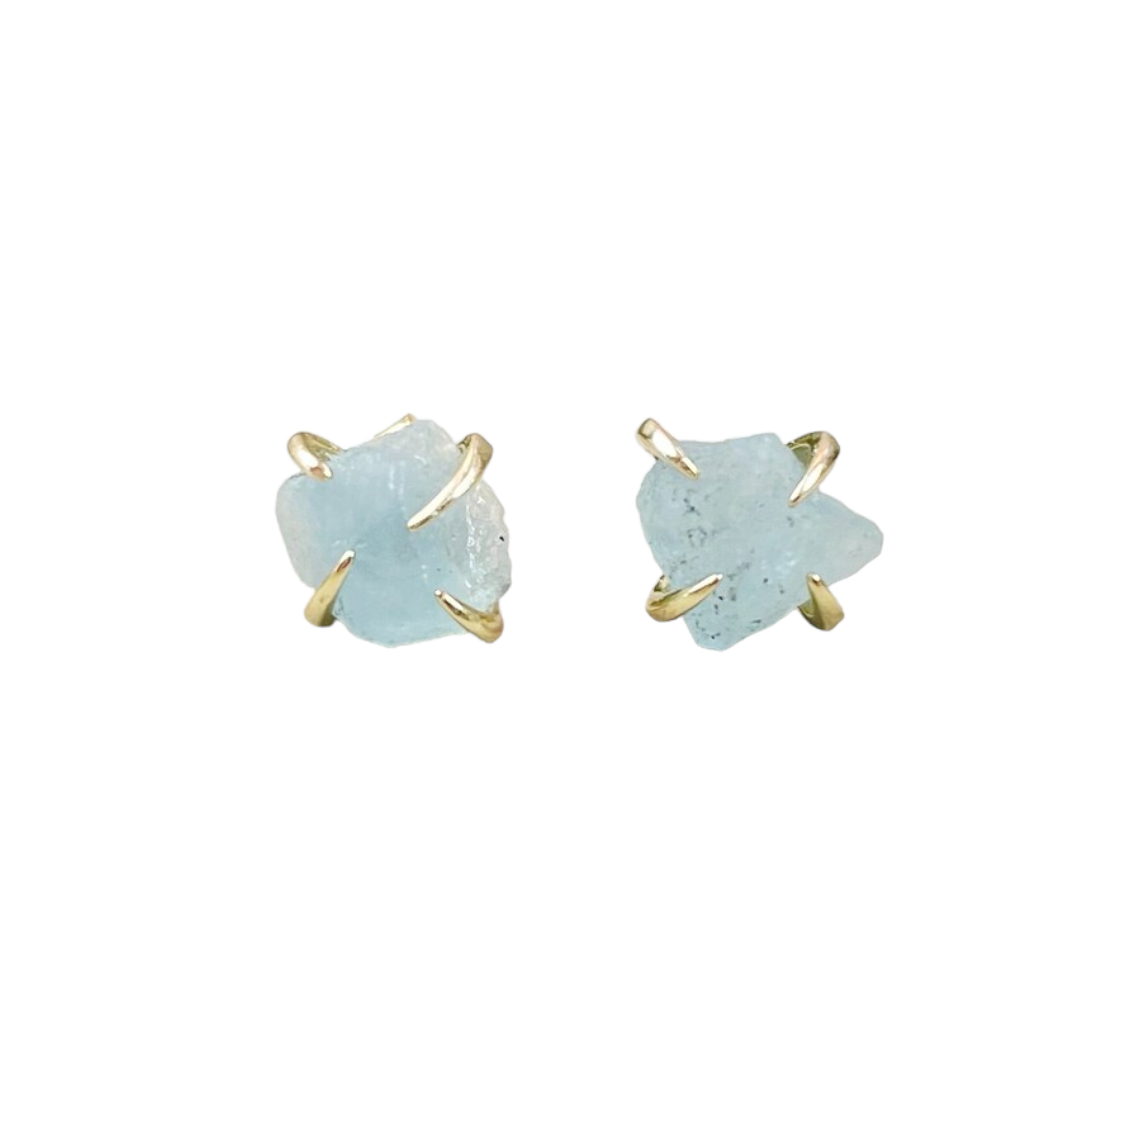 New Arrival Vintage Fashion Jewelry 925 Sterling Silver Natural Aqua Marine Stud Earrings For Women Destiny Jewellery